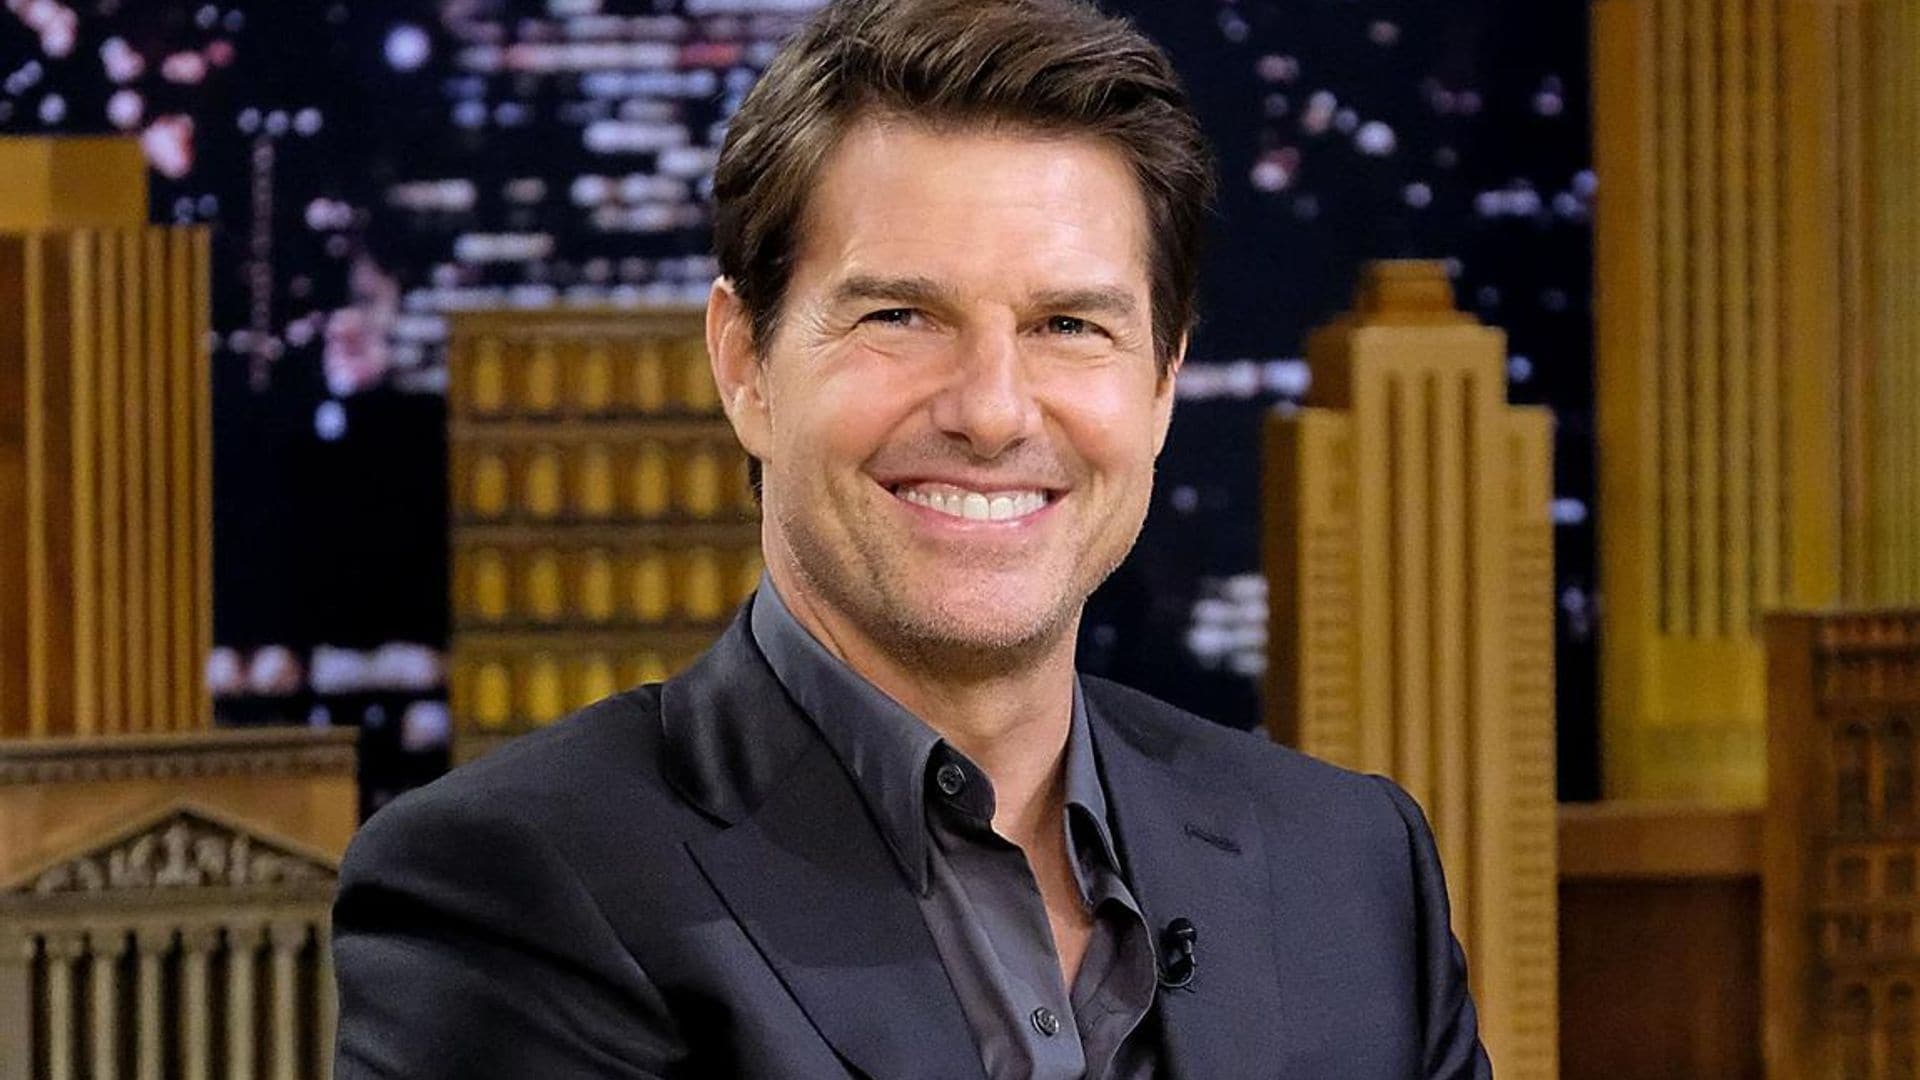 Tom Cruise was recognized by fans while wearing a face mask